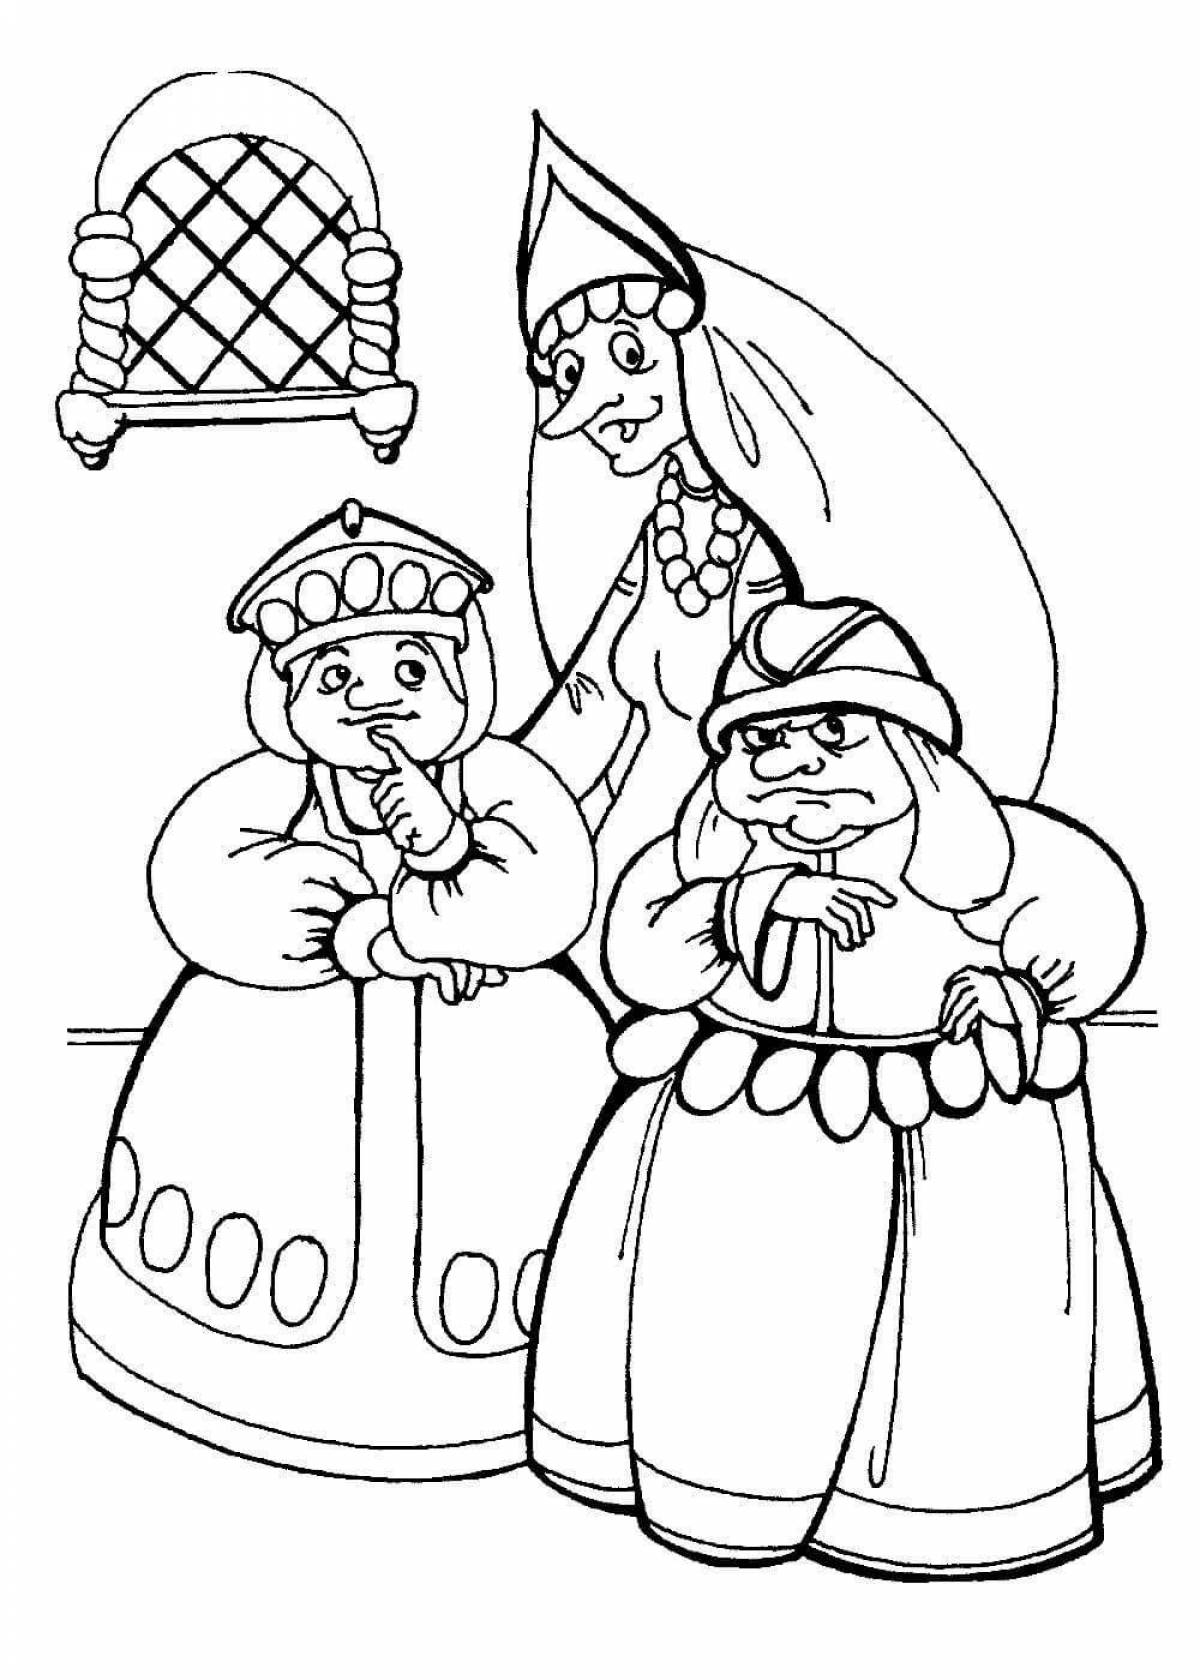 Inviting coloring pages based on Pushkin's fairy tales